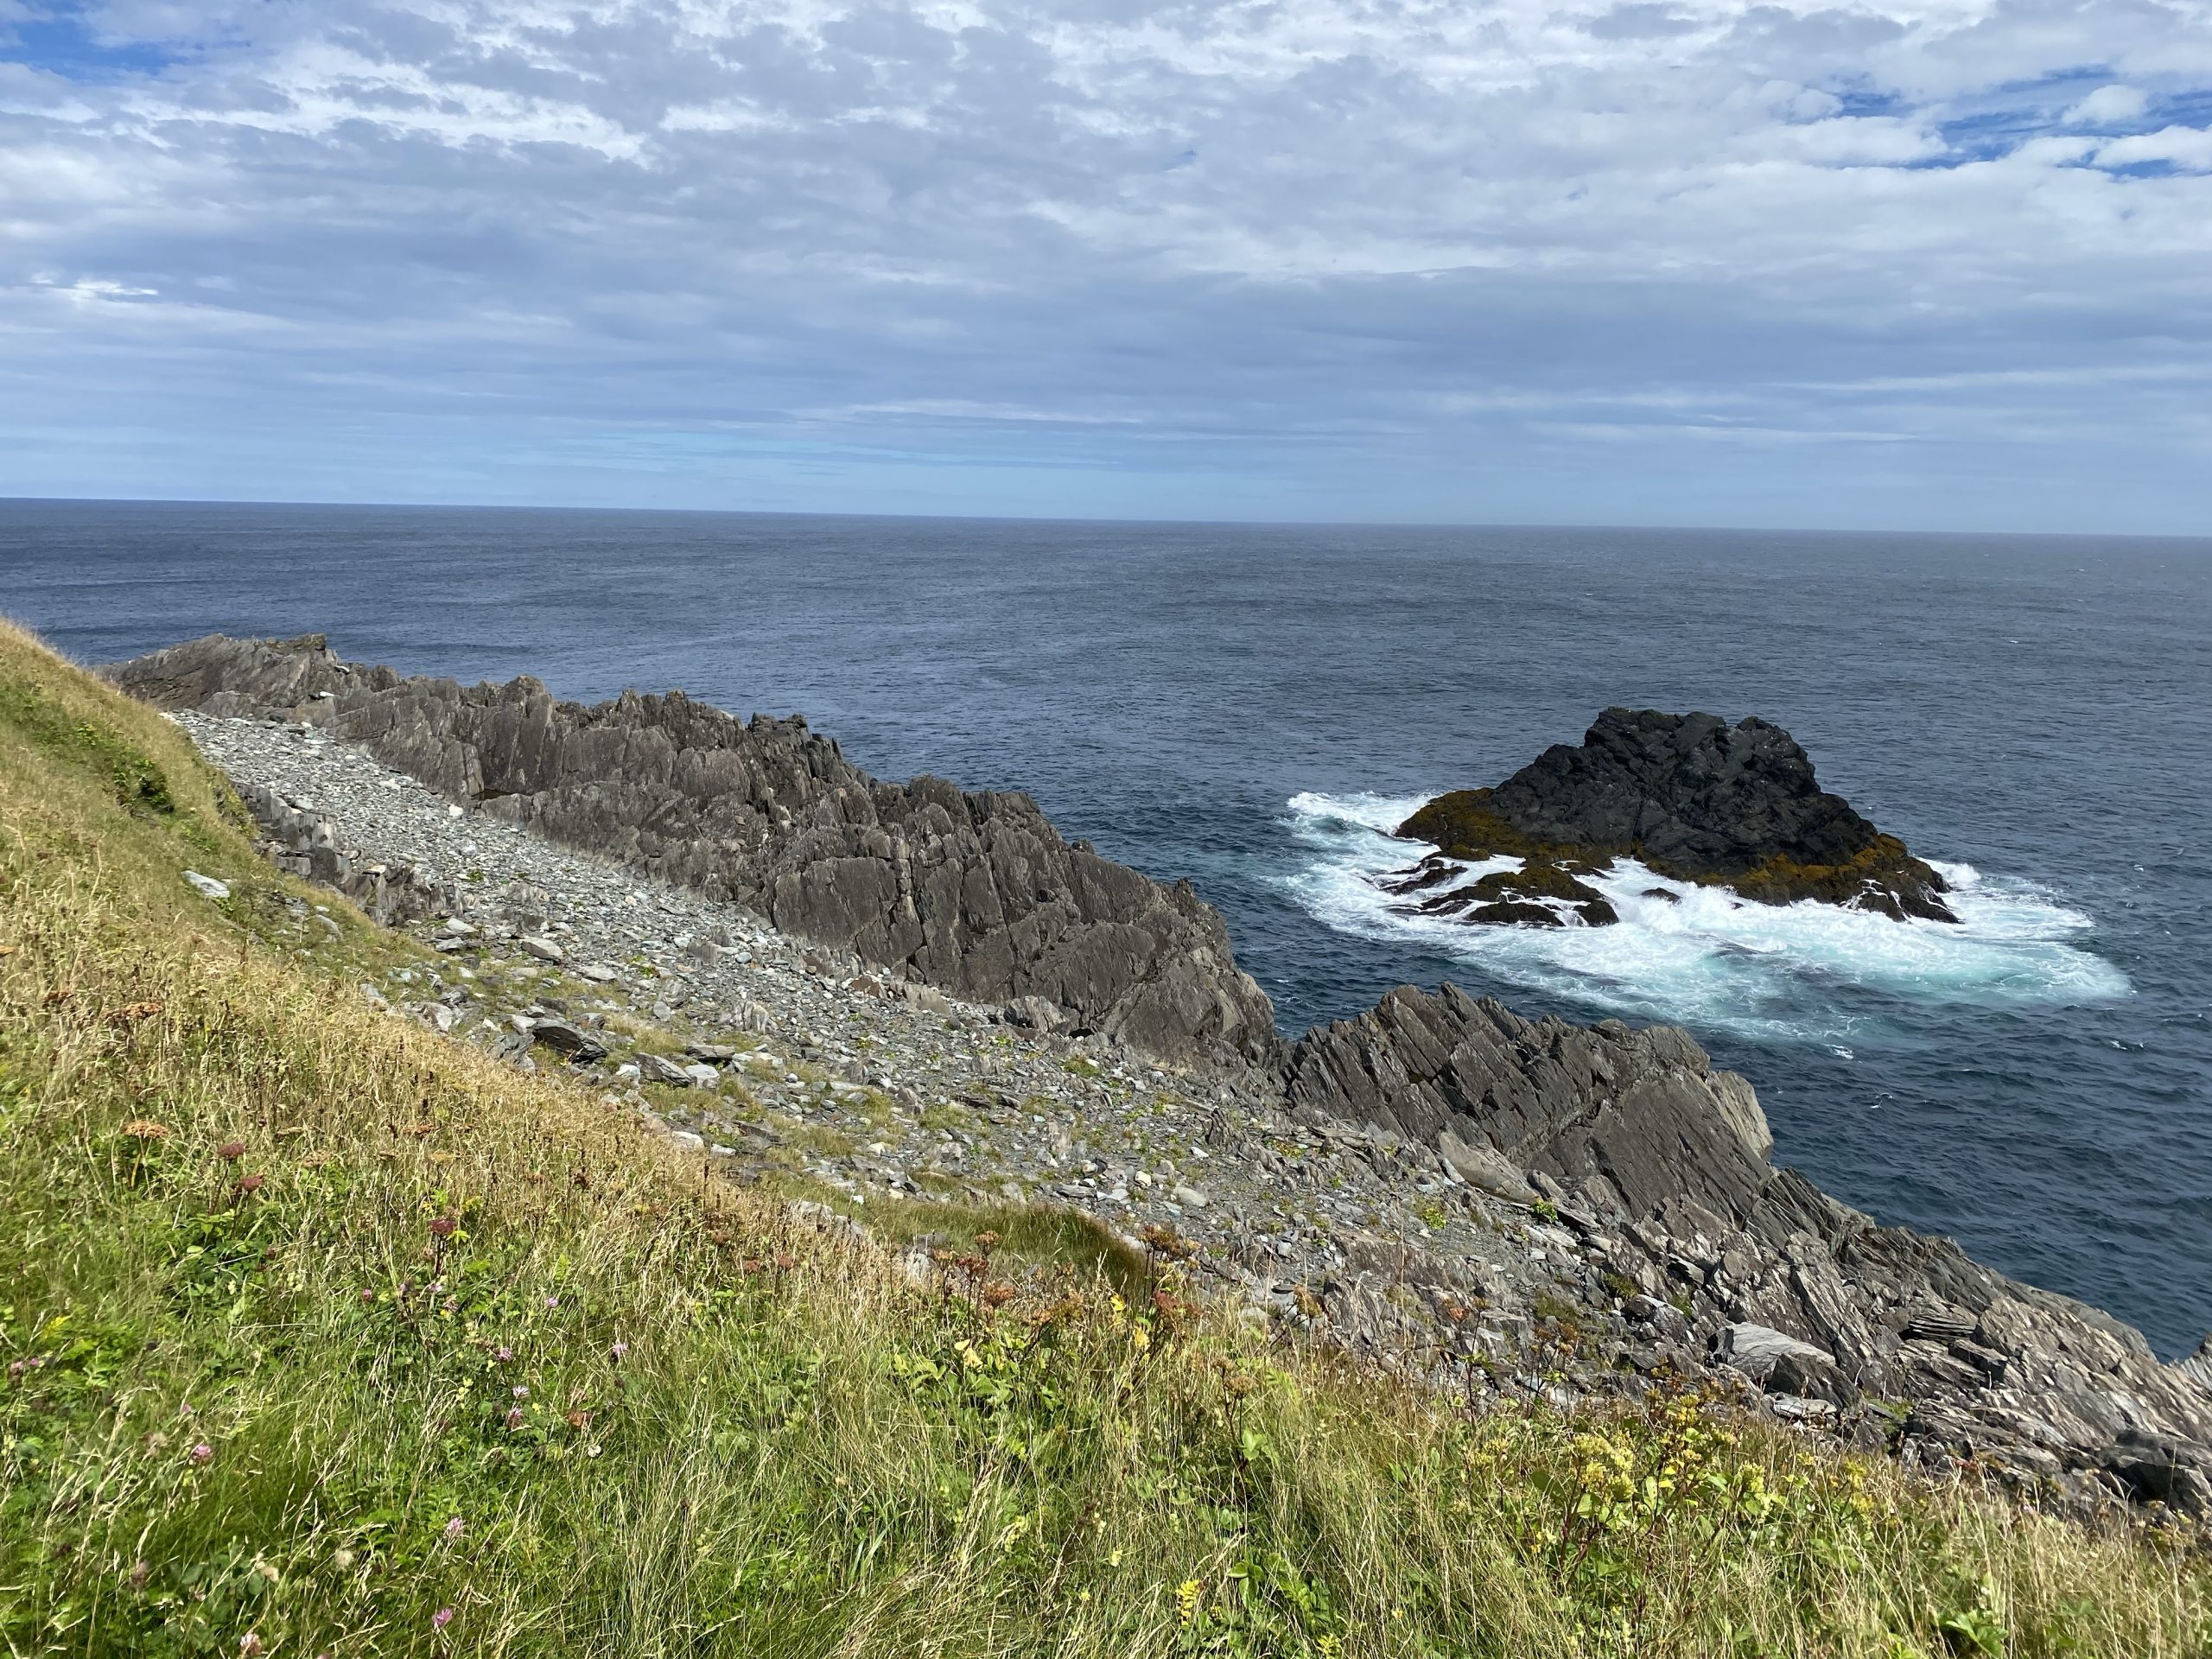 Interesting rock formations at Cape Race in Newfoundland.